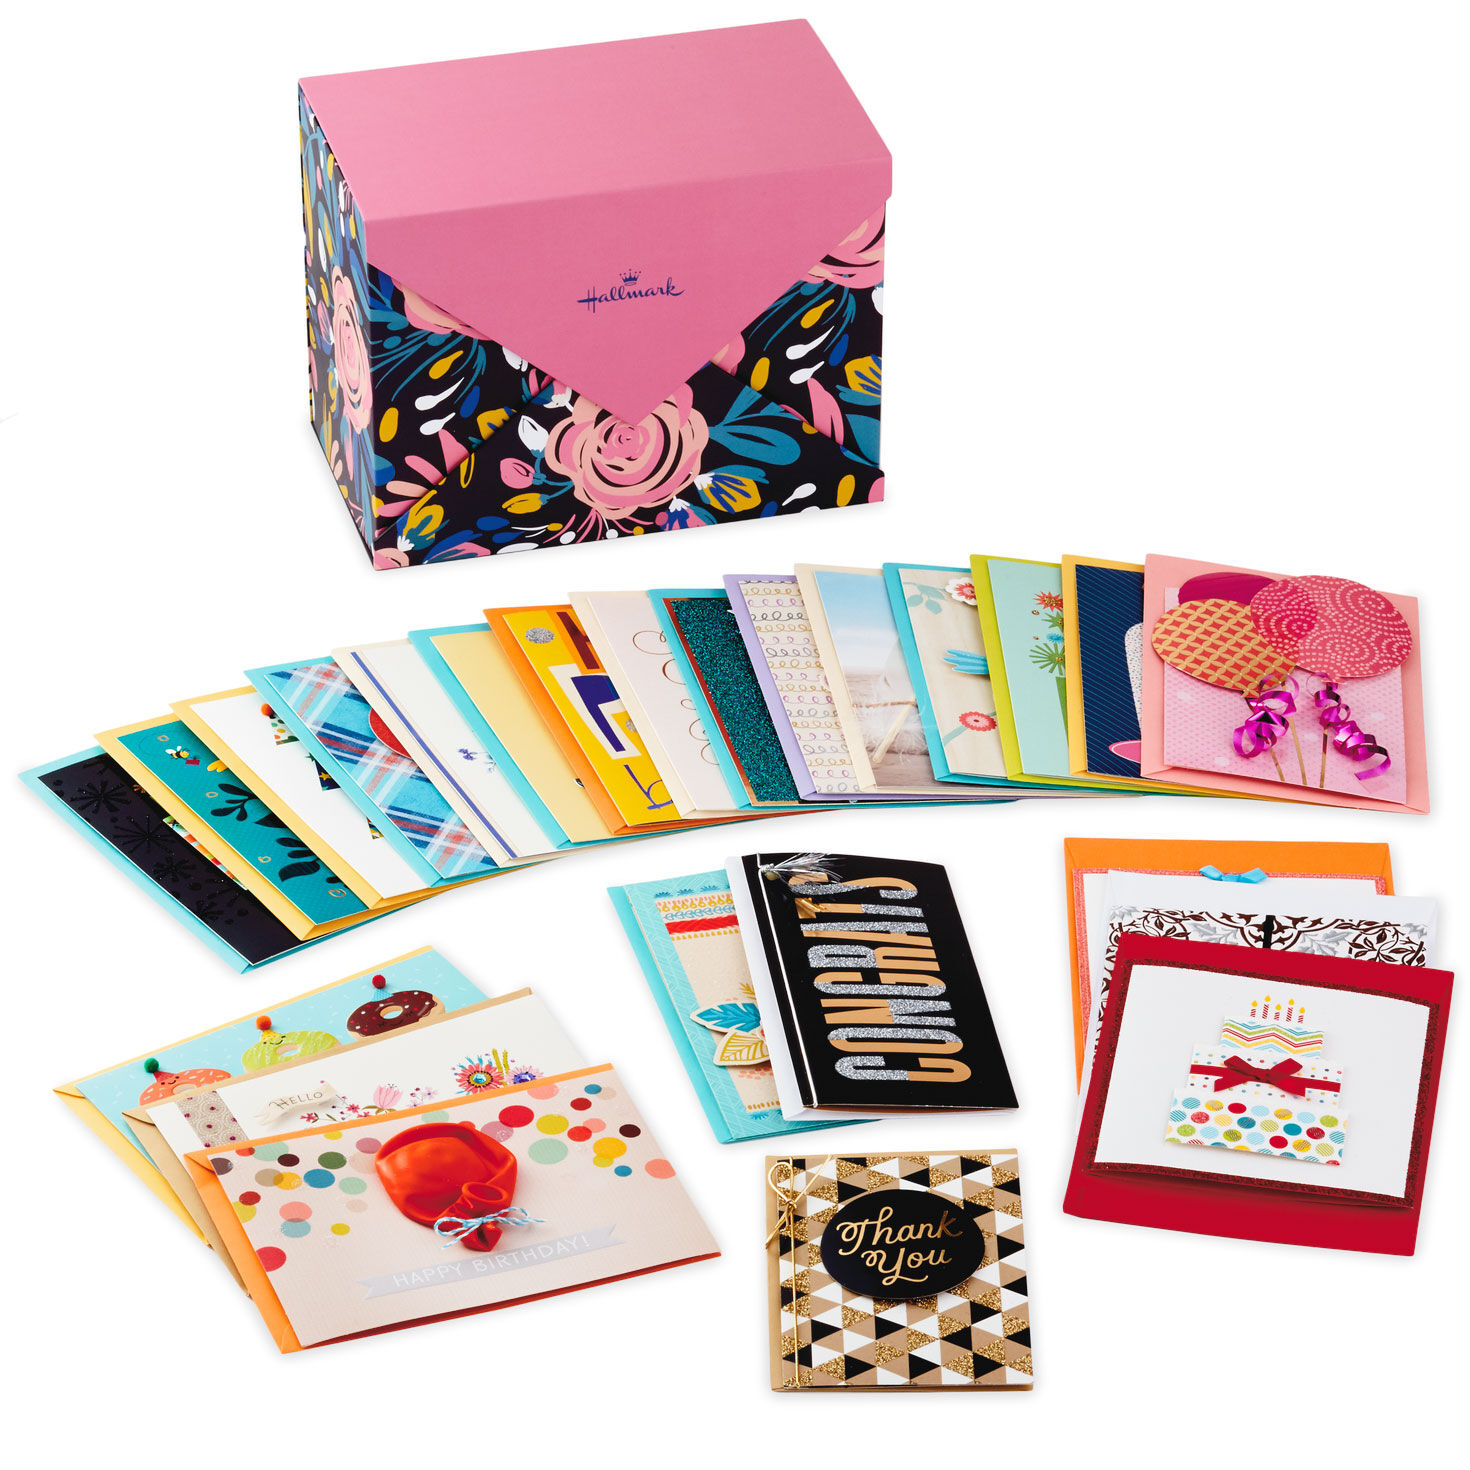 HALLMARK Family Greeting Cards Value Pack Assortment of 16 All Occasions Cards 